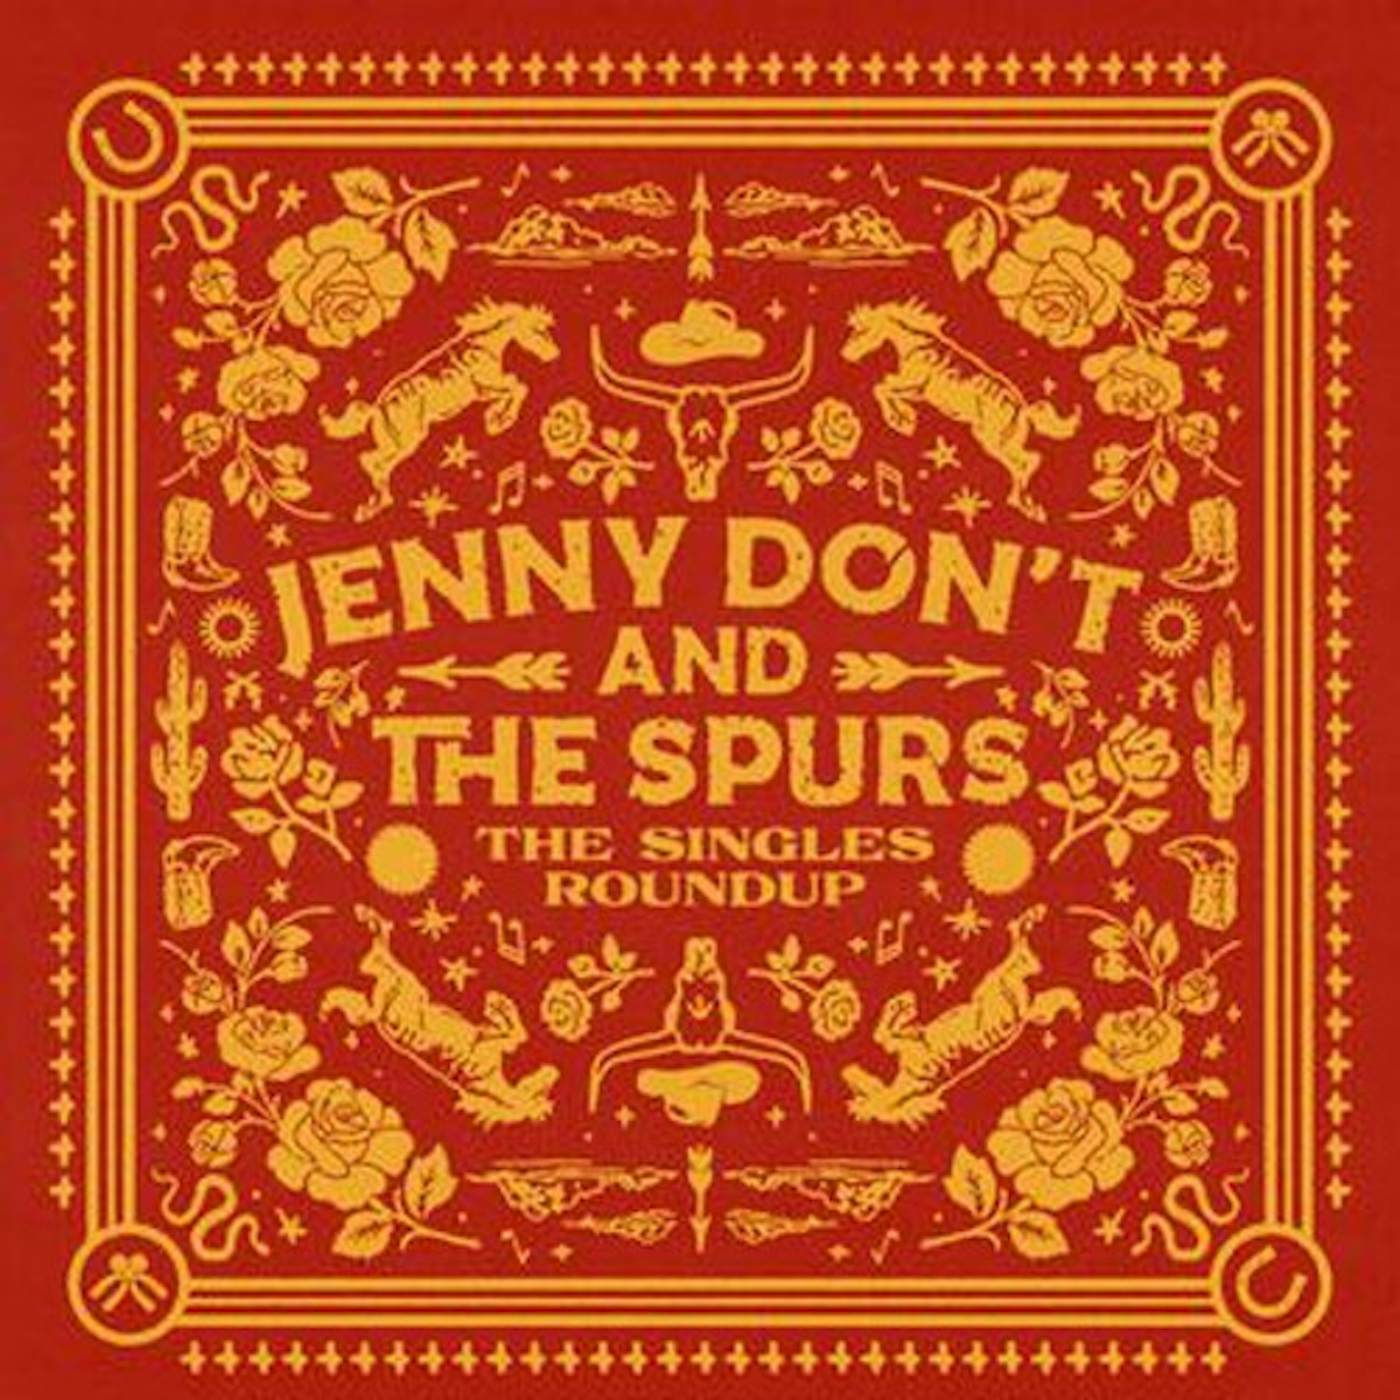 Jenny Don't And The Spurs SINGLES ROUNDUP Vinyl Record